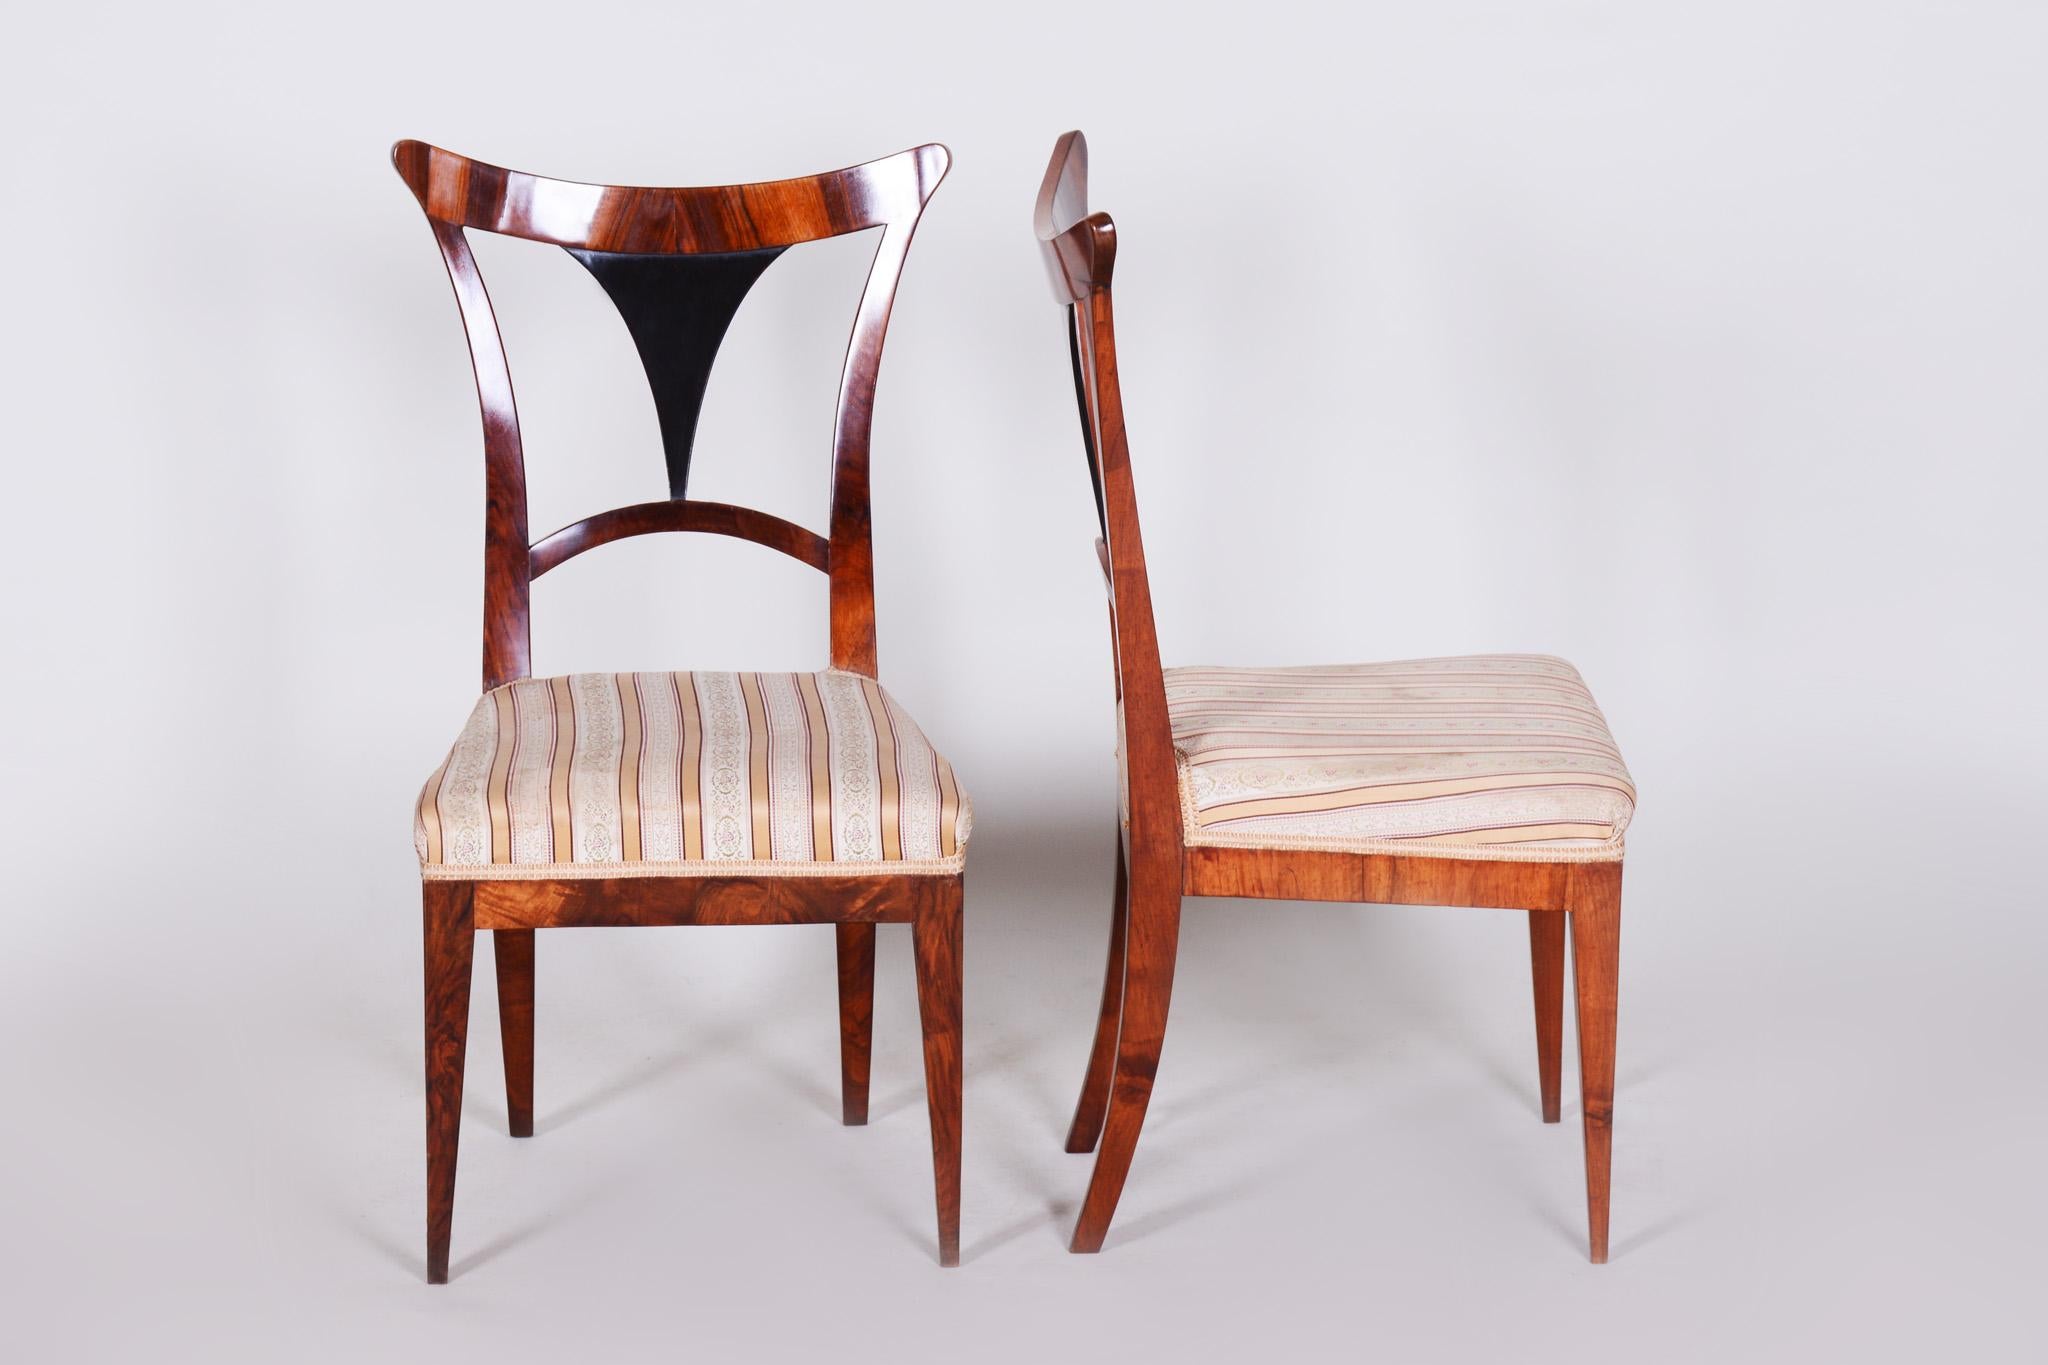 Set of Biedermeier chairs, two pieces.
Completely restored.
Source: Austria, Wien
Period: 1810-1819
Shellac-polish.

We guarantee safe a the cheapest air transport from Europe to the whole world within 7 days.
The price is the same as for ship